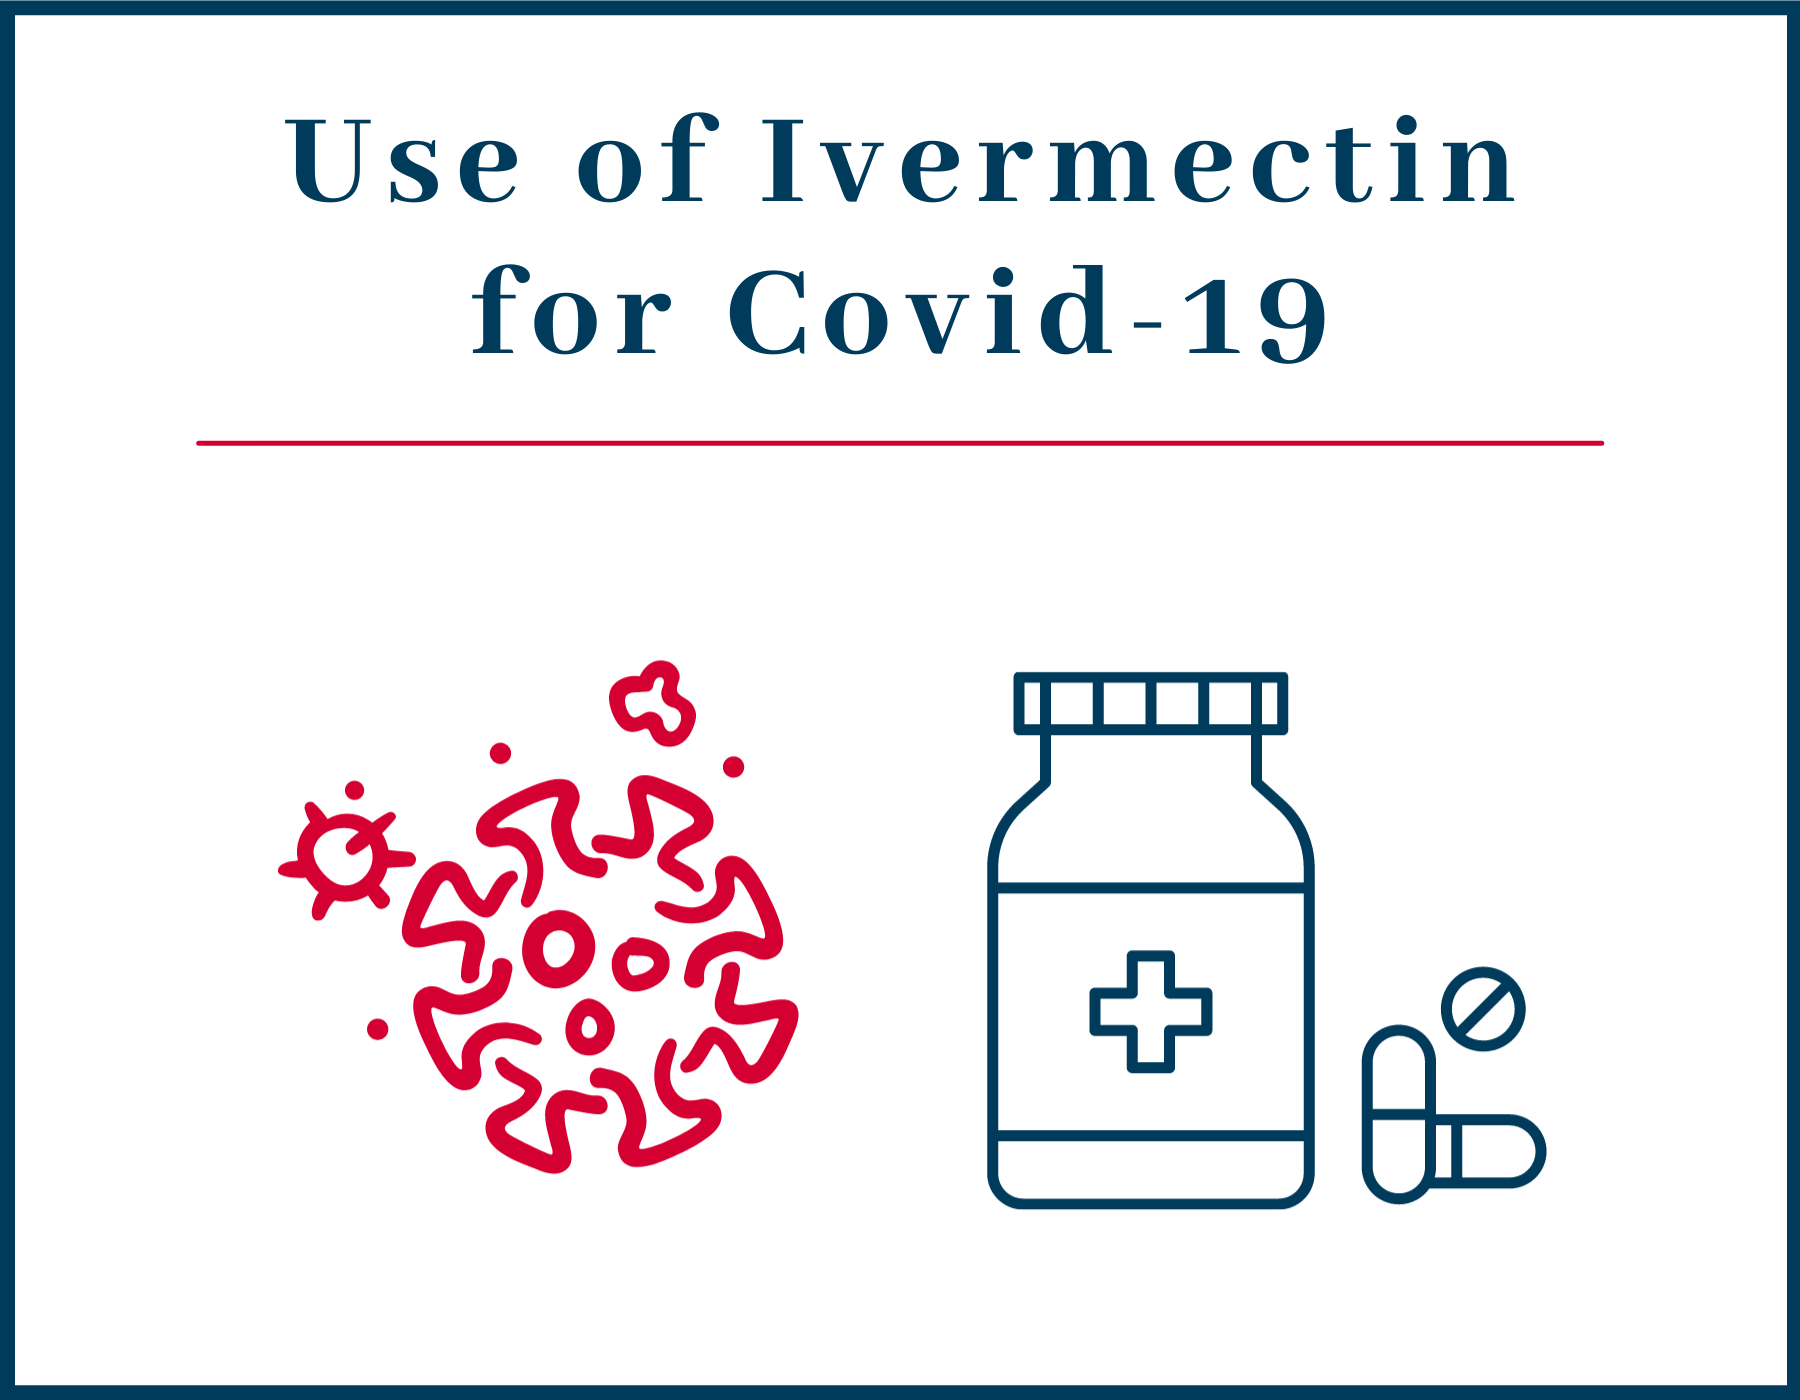 Use of Ivermectin in COVID-19